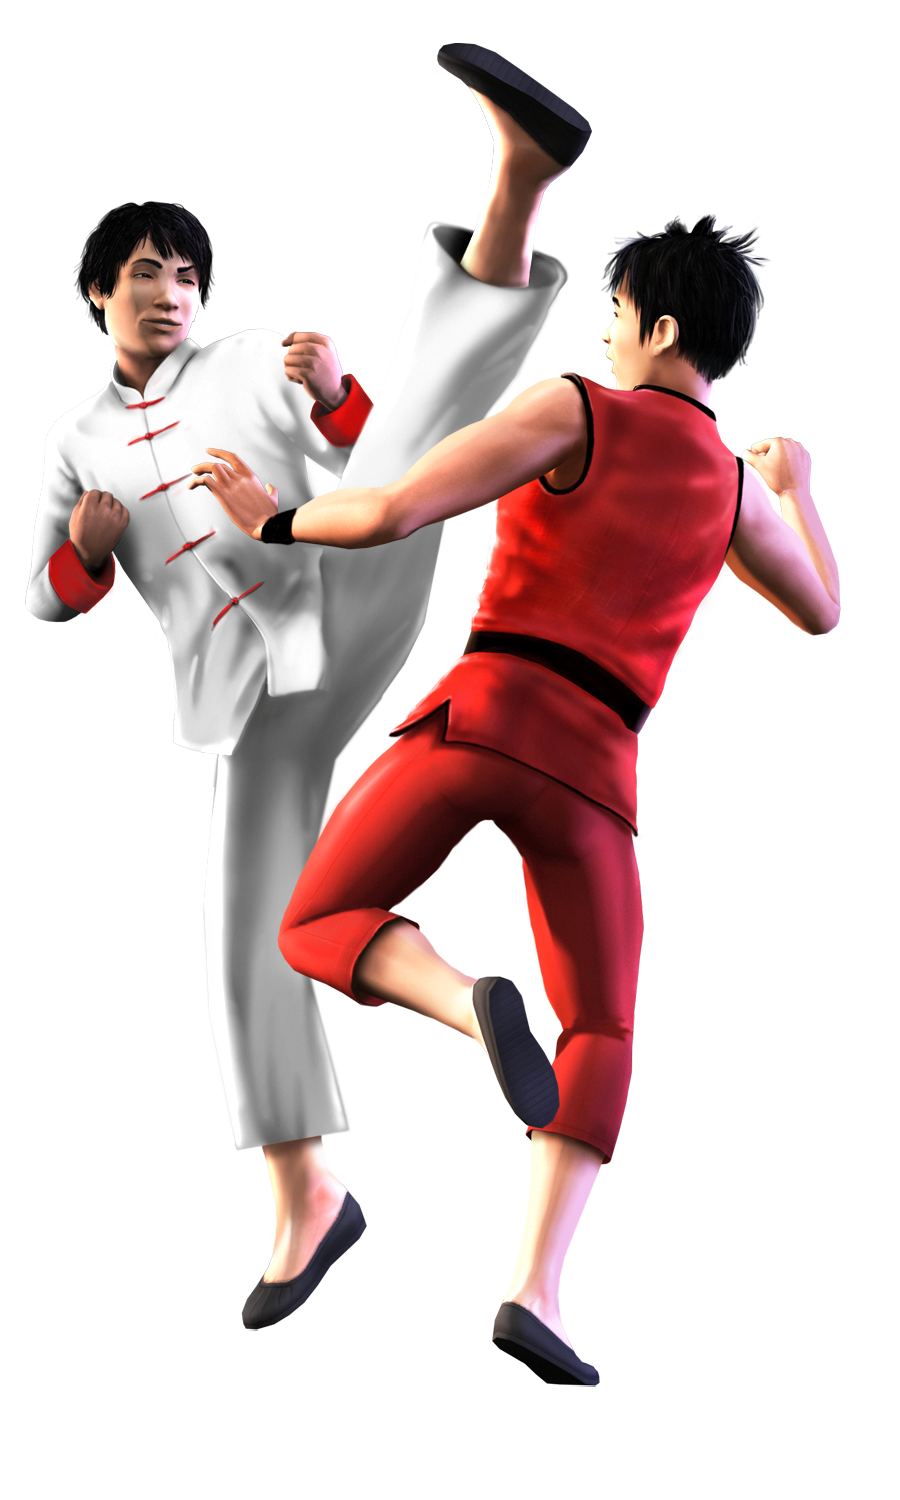 Martial arts | The Sims Wiki | FANDOM powered by Wikia